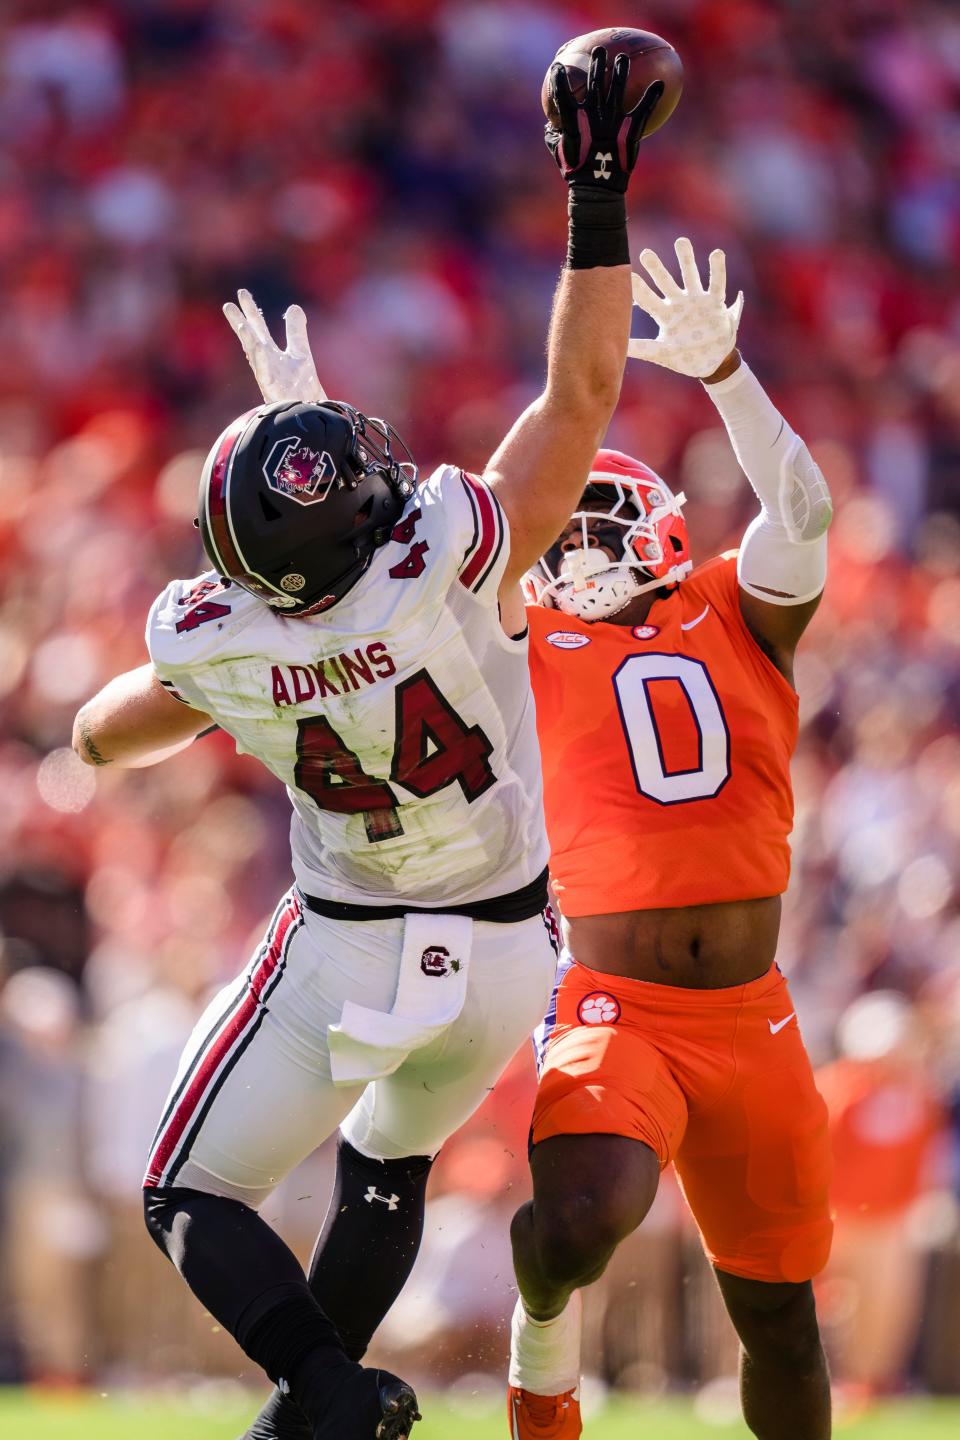 South Carolina tight end Nate Adkins (44) makes a catch while covered by Clemson linebacker Barrett Carter.